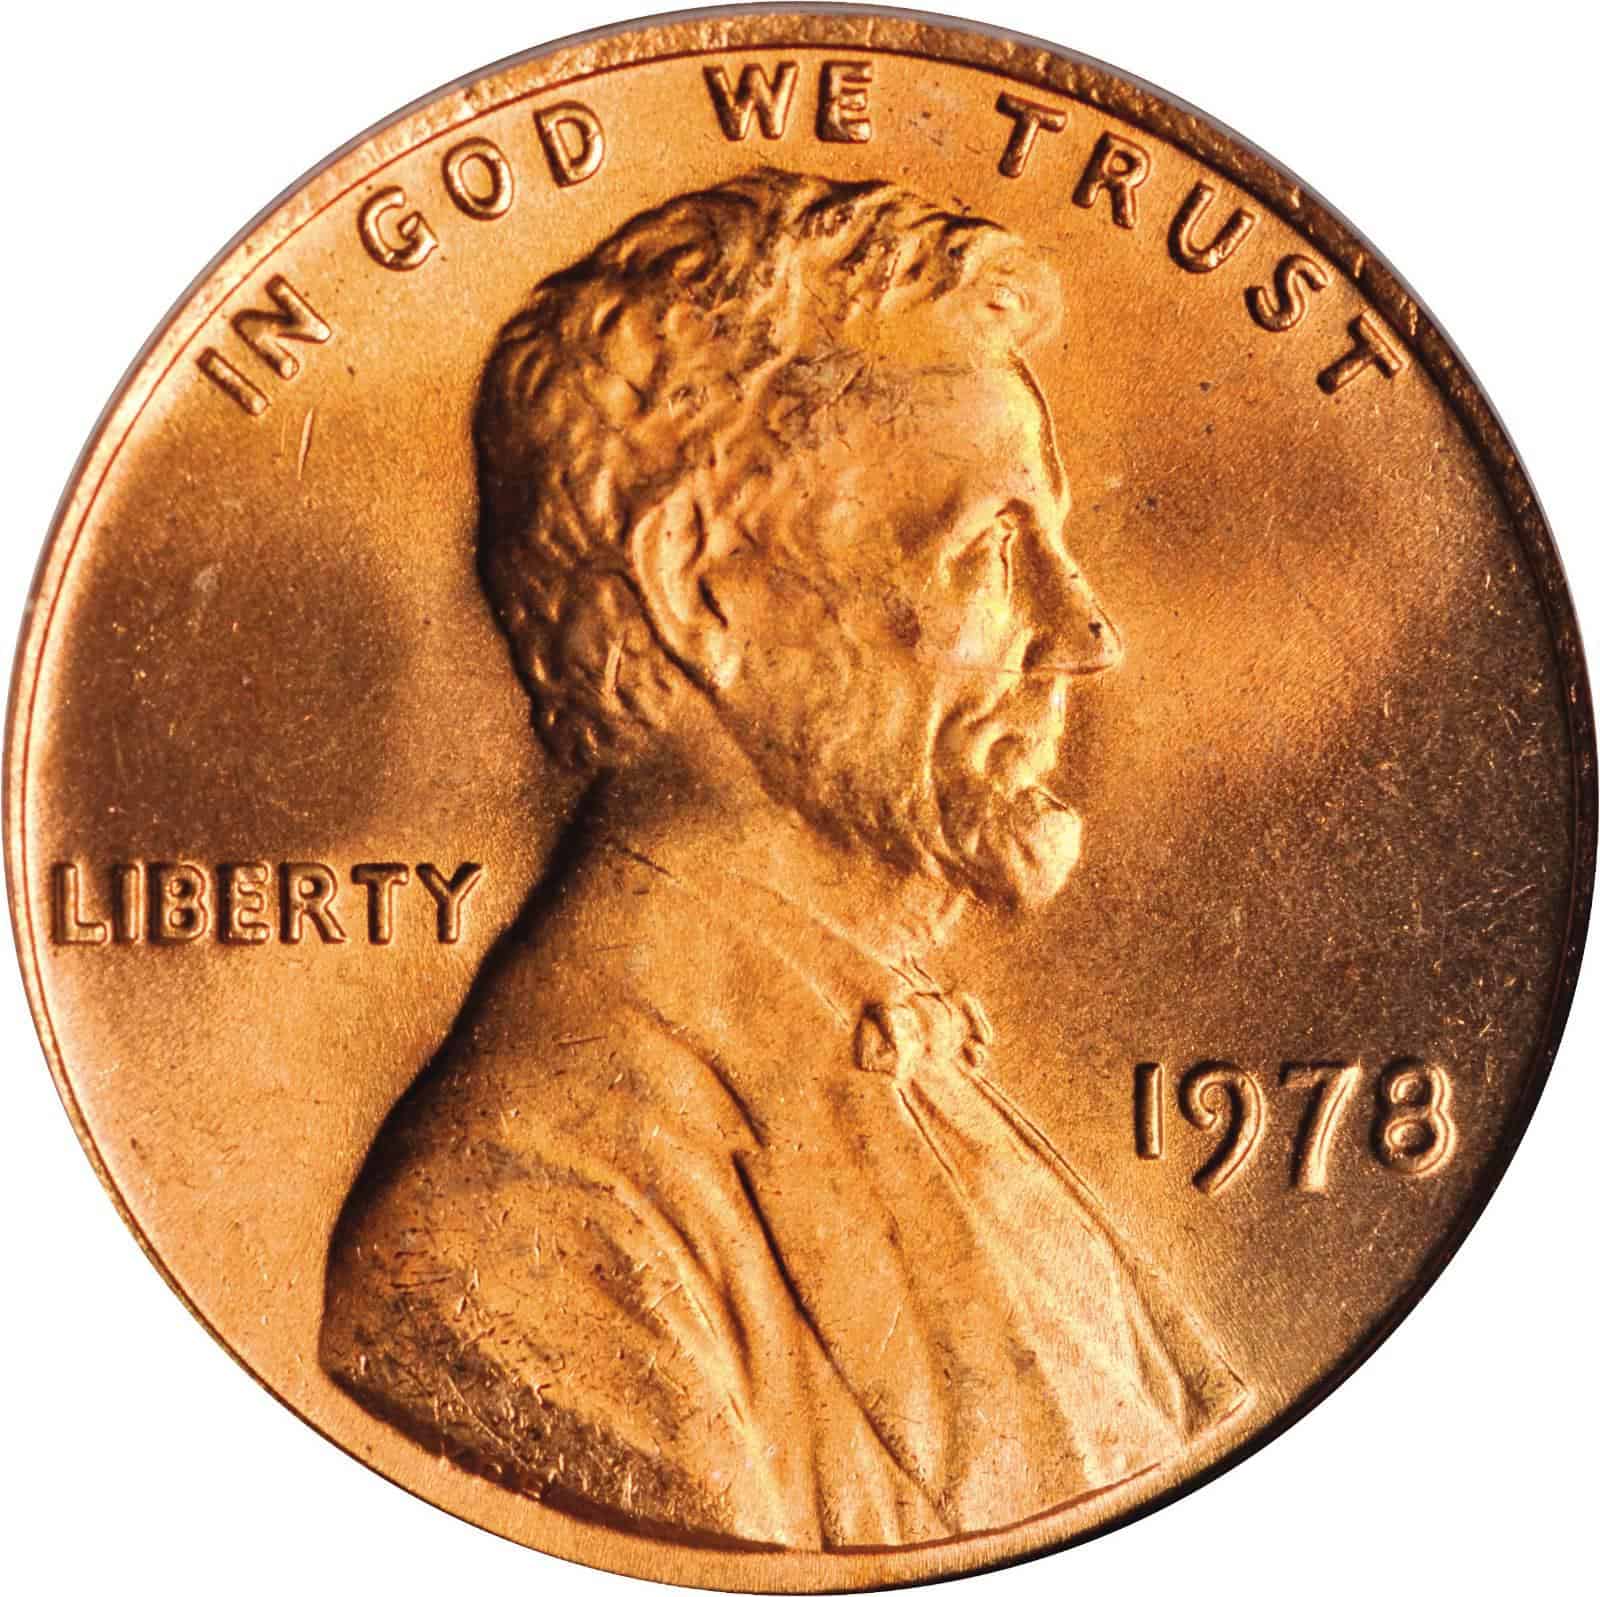 The 1978 Lincoln Memorial penny obverse